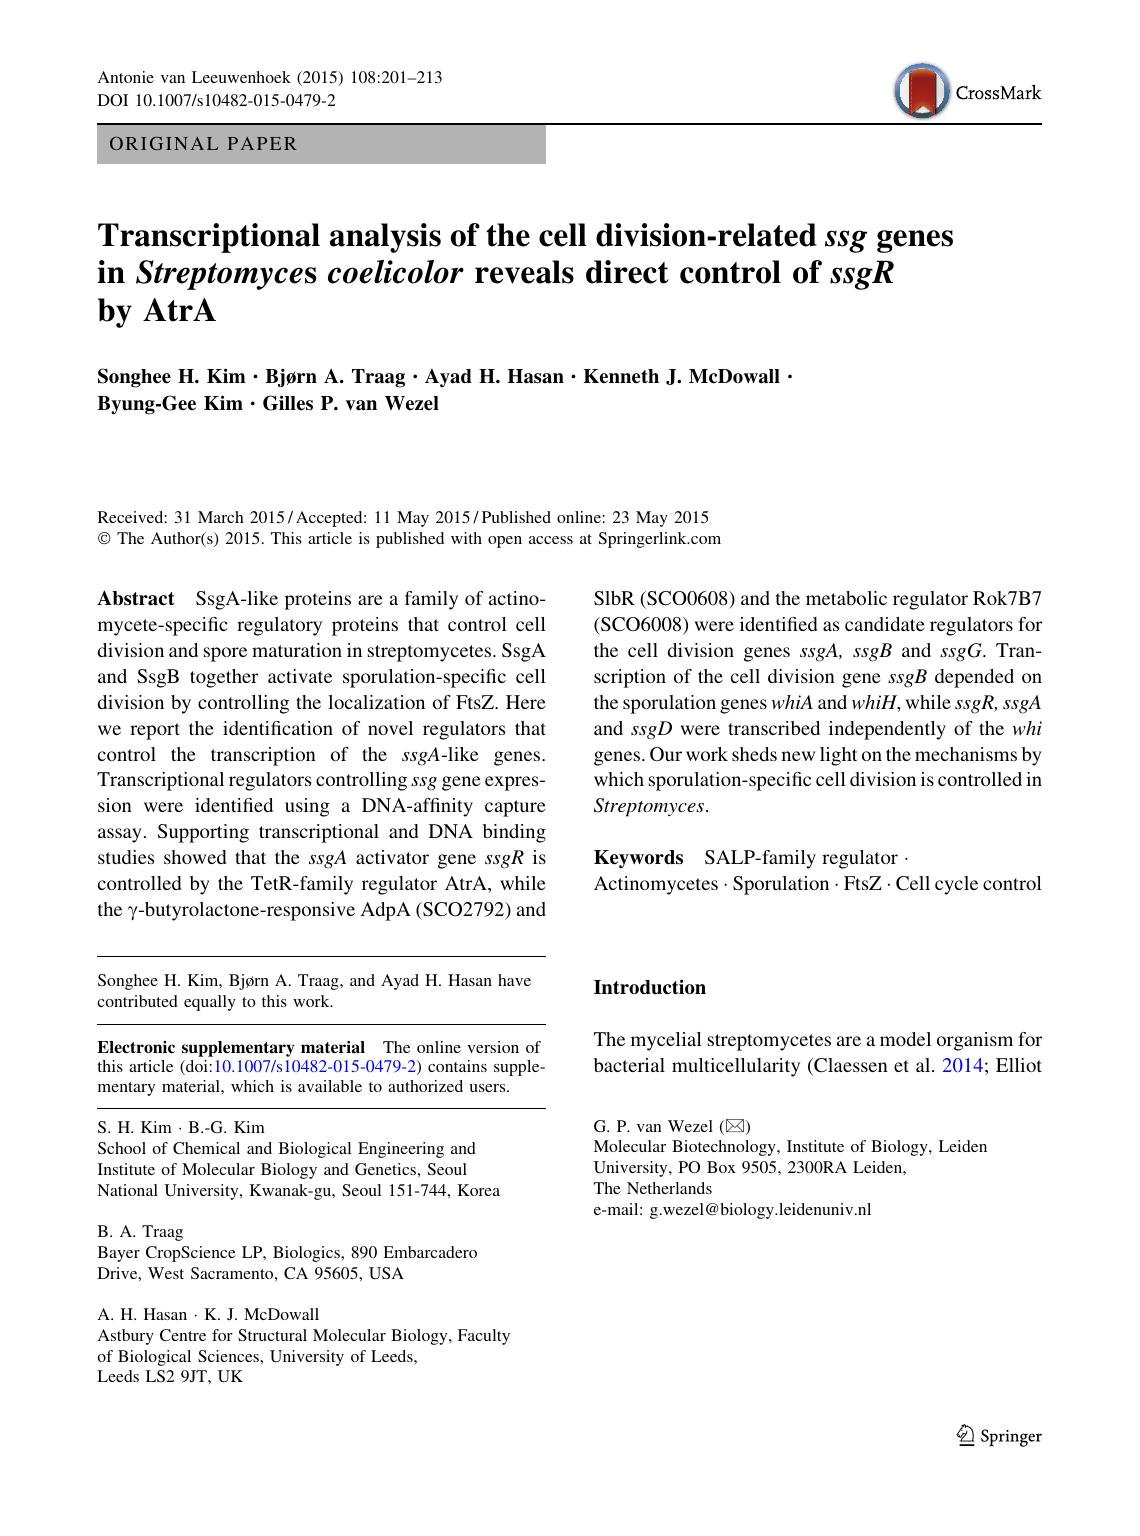 Transcriptional analysis of the cell division-related ssg genes in Streptomyces coelicolor reveals direct control of ssgR by AtrA by unknow